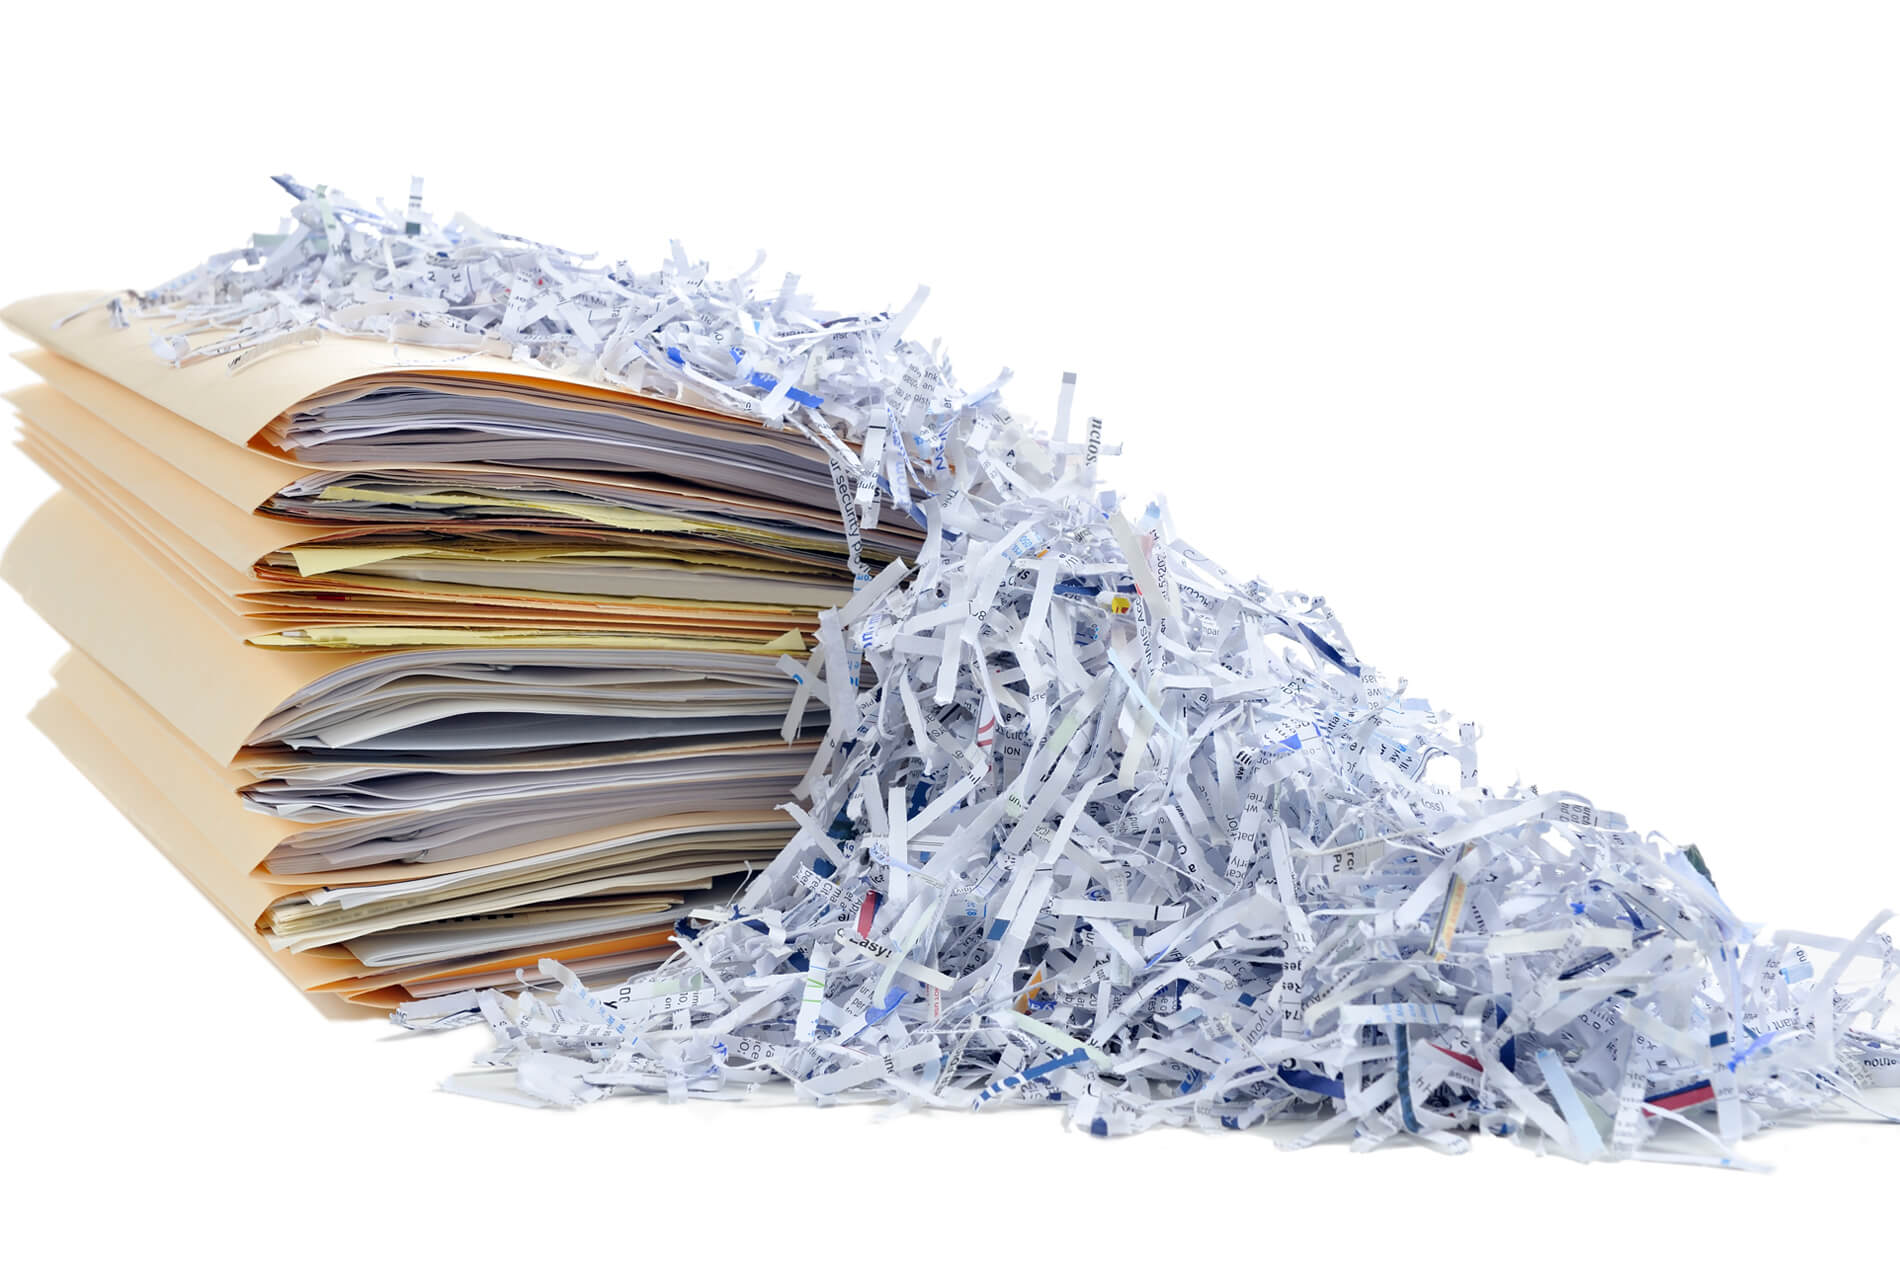 A pile of documents in manilla envelopes sits next to a pile of shredded paper.